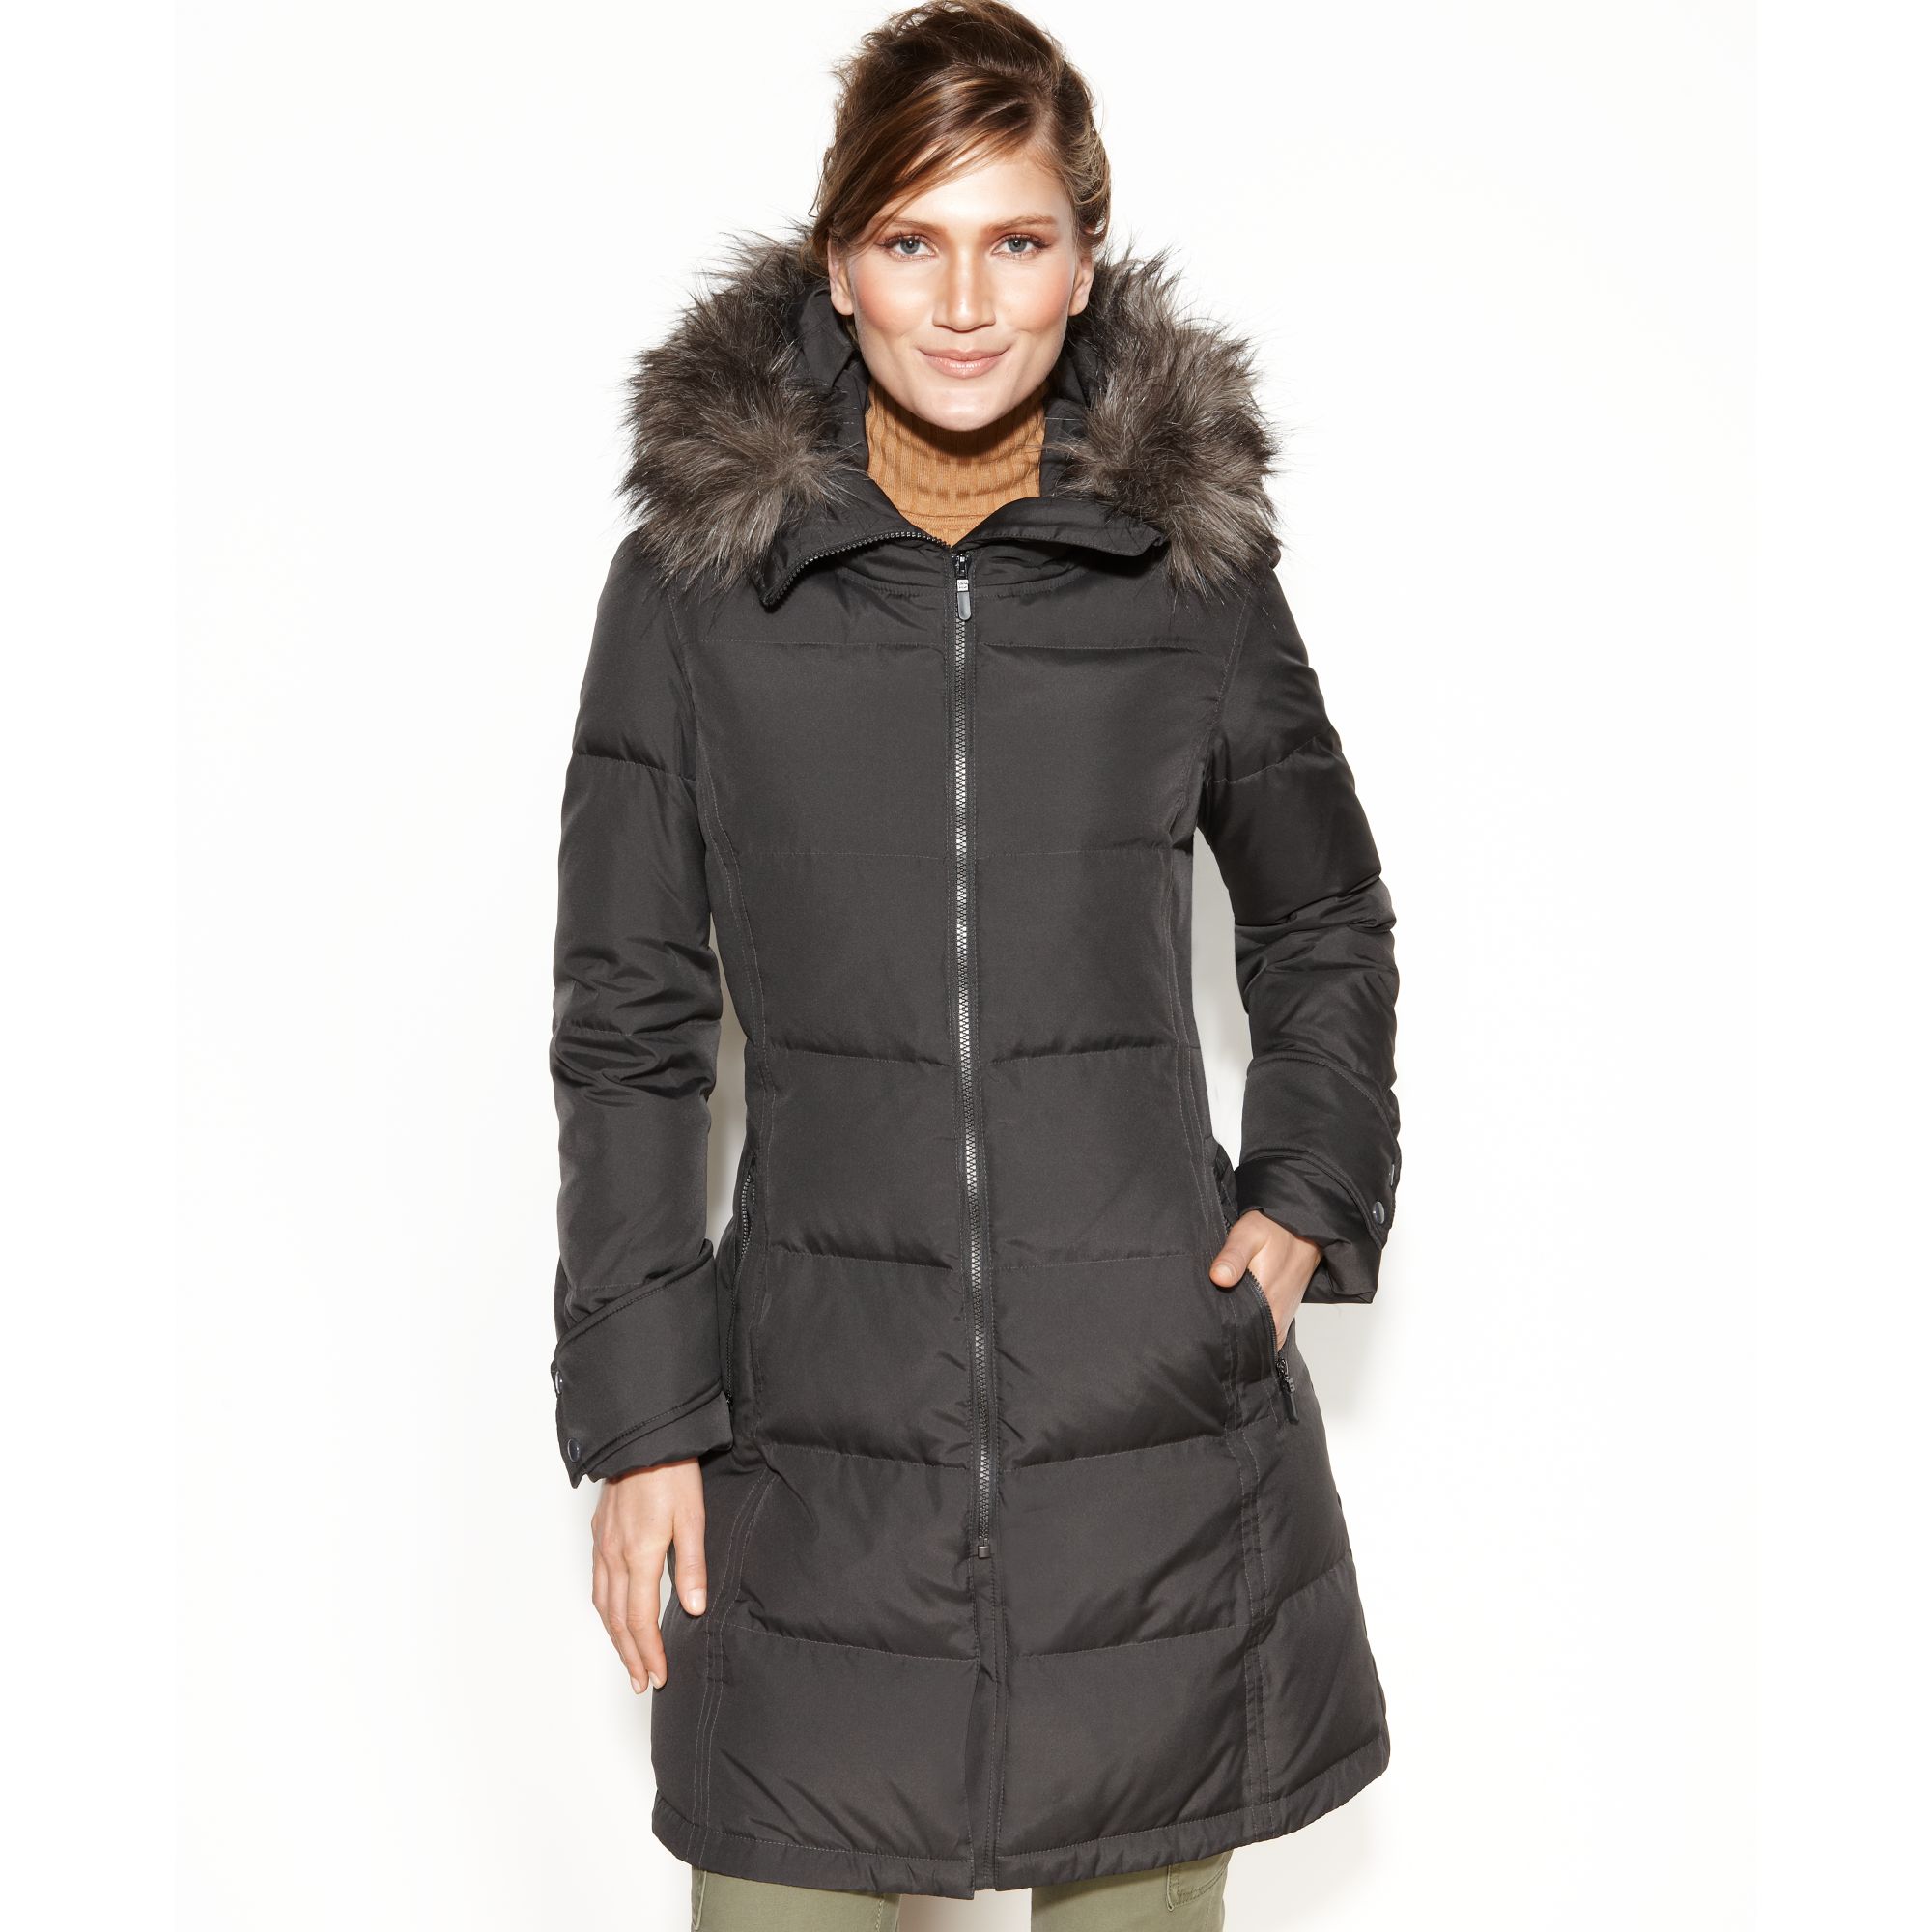 Calvin Klein Hooded Faux-fur-trim Quilted Puffer in Dark Charcoal (Gray) -  Lyst